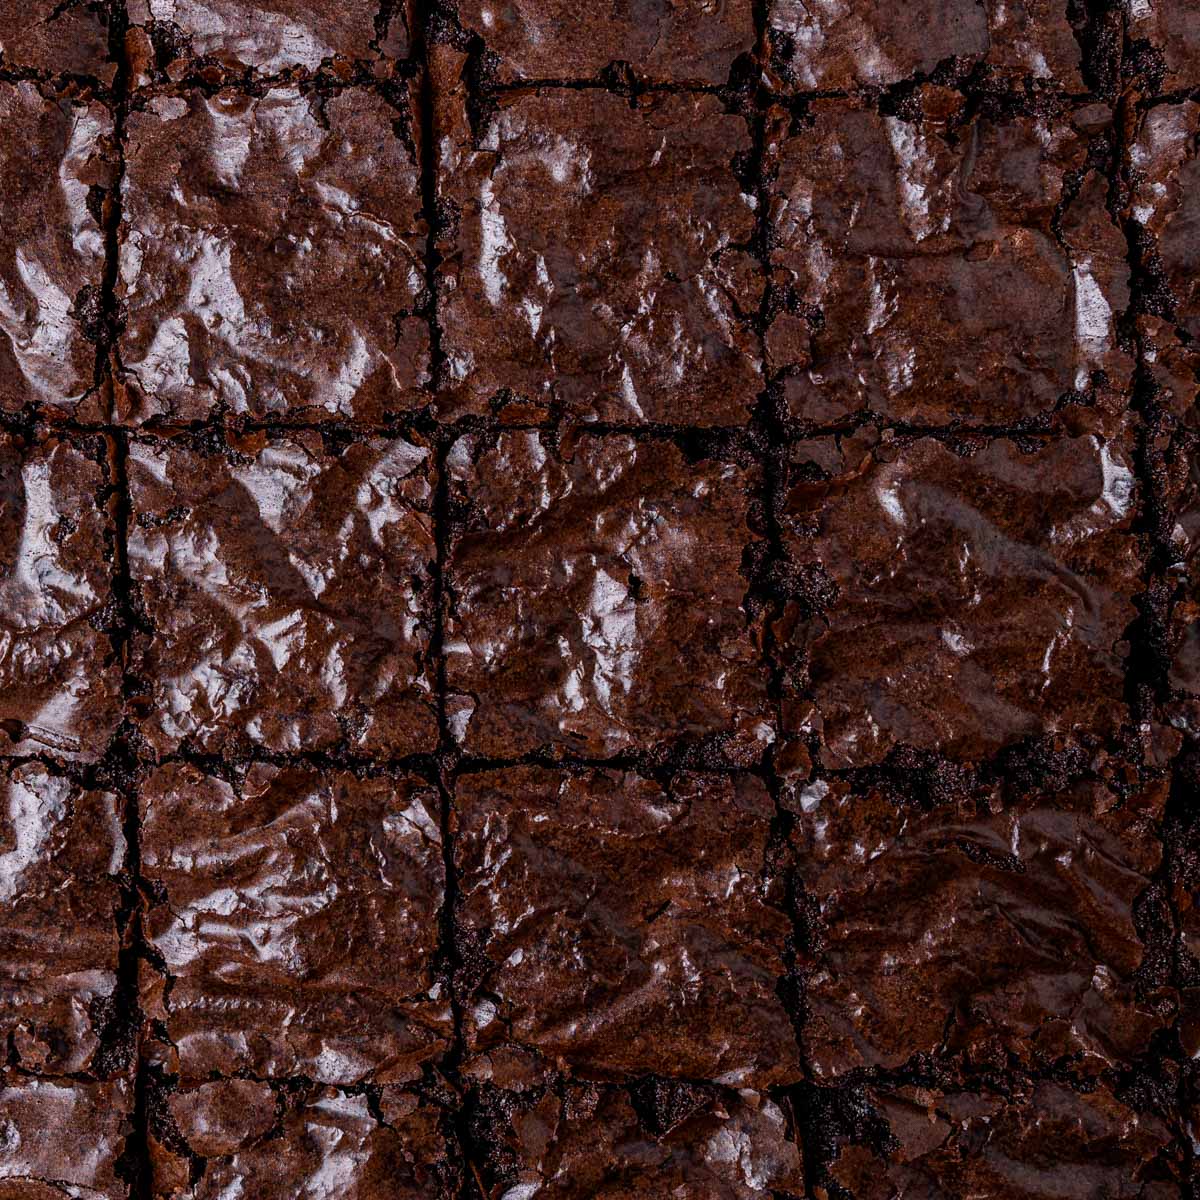 Best Boxed Brownie Mix: Which Brand Makes the Chewiest Brownies?